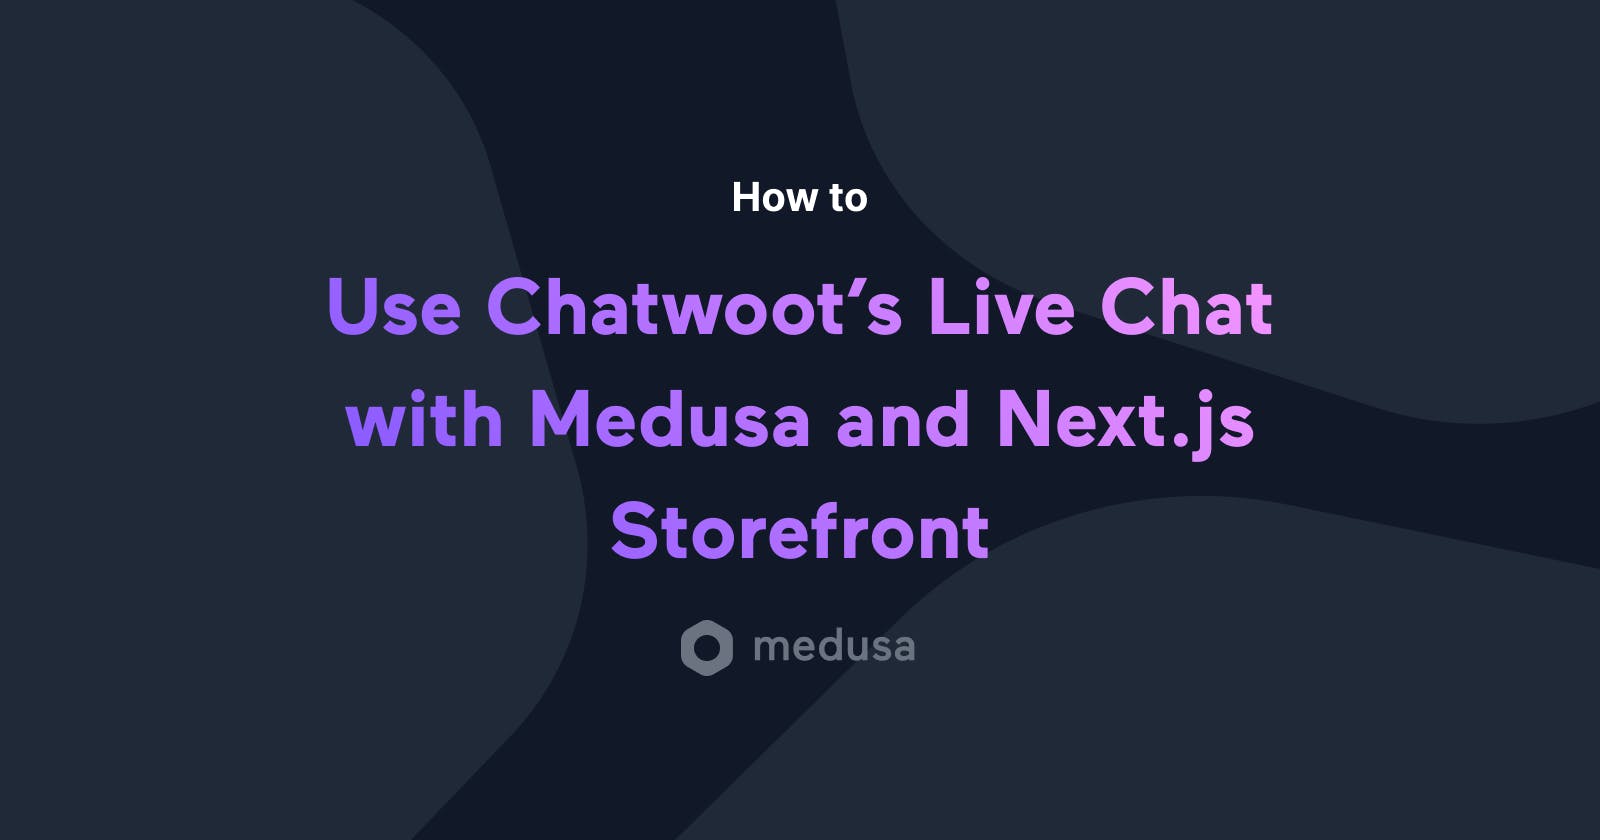 How to Create an Ecommerce Store with Live Chat using Open Source Solutions